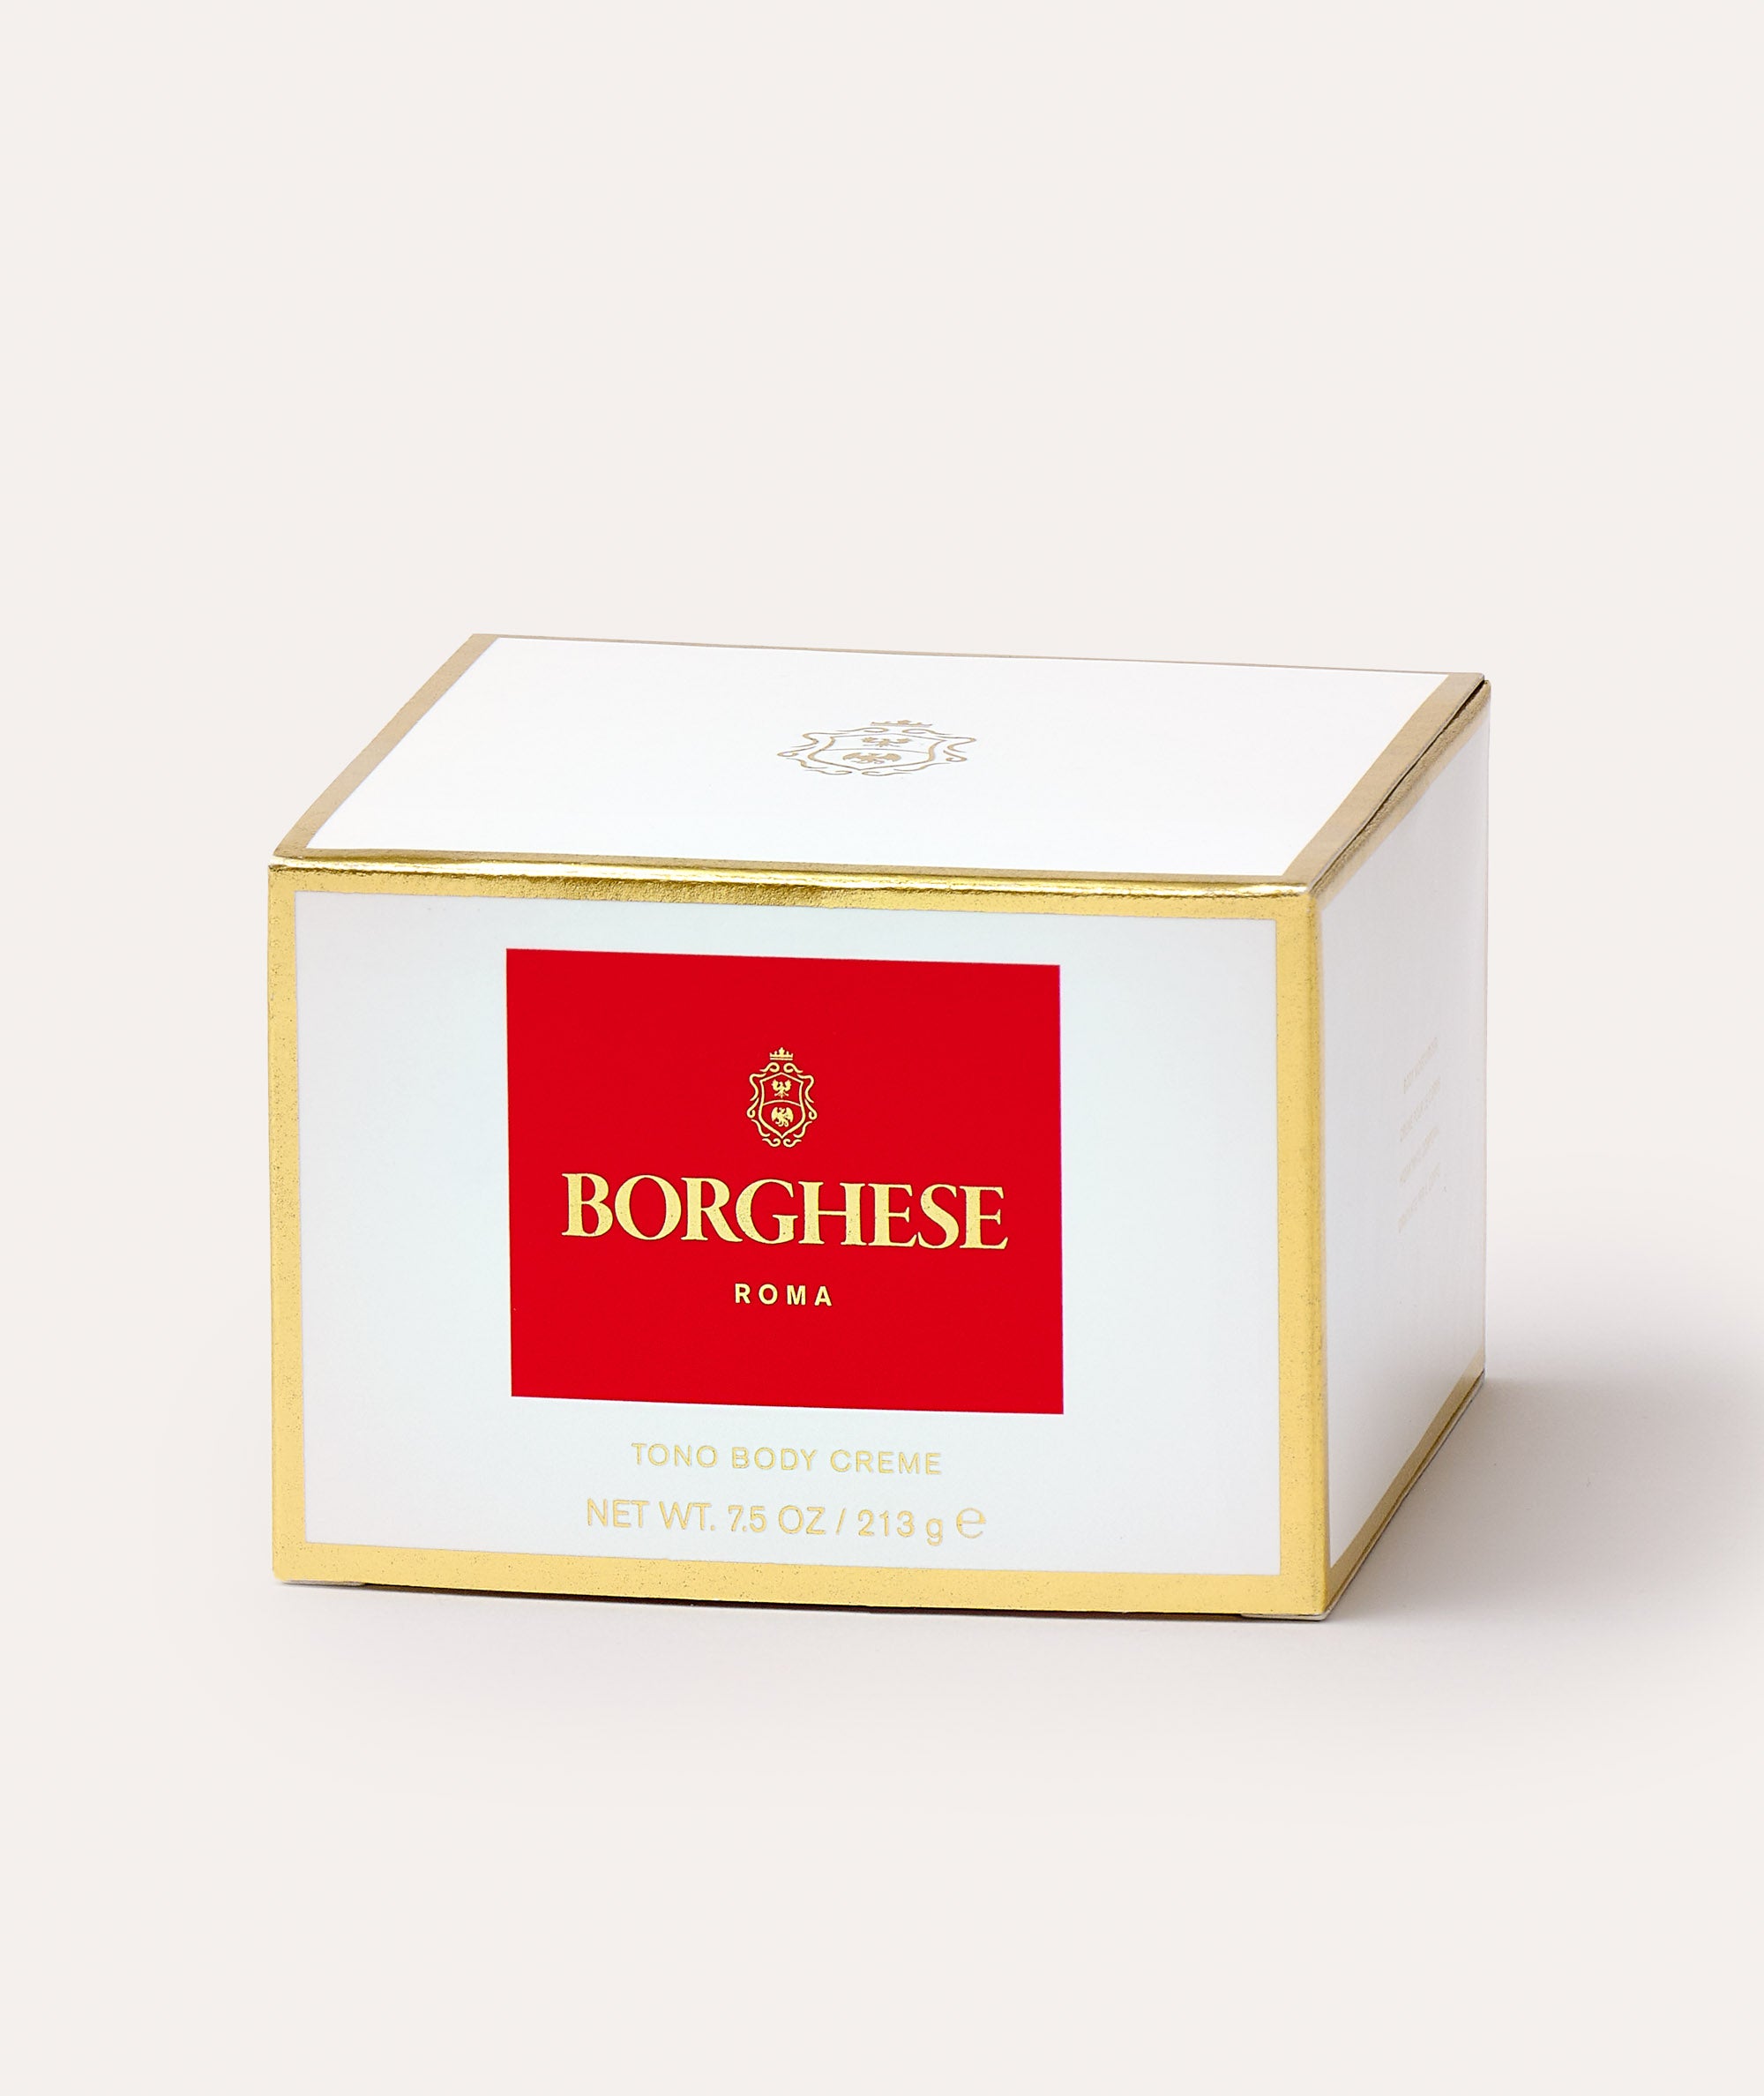 This is a picture of the Borghese Tono Body Creme in a box